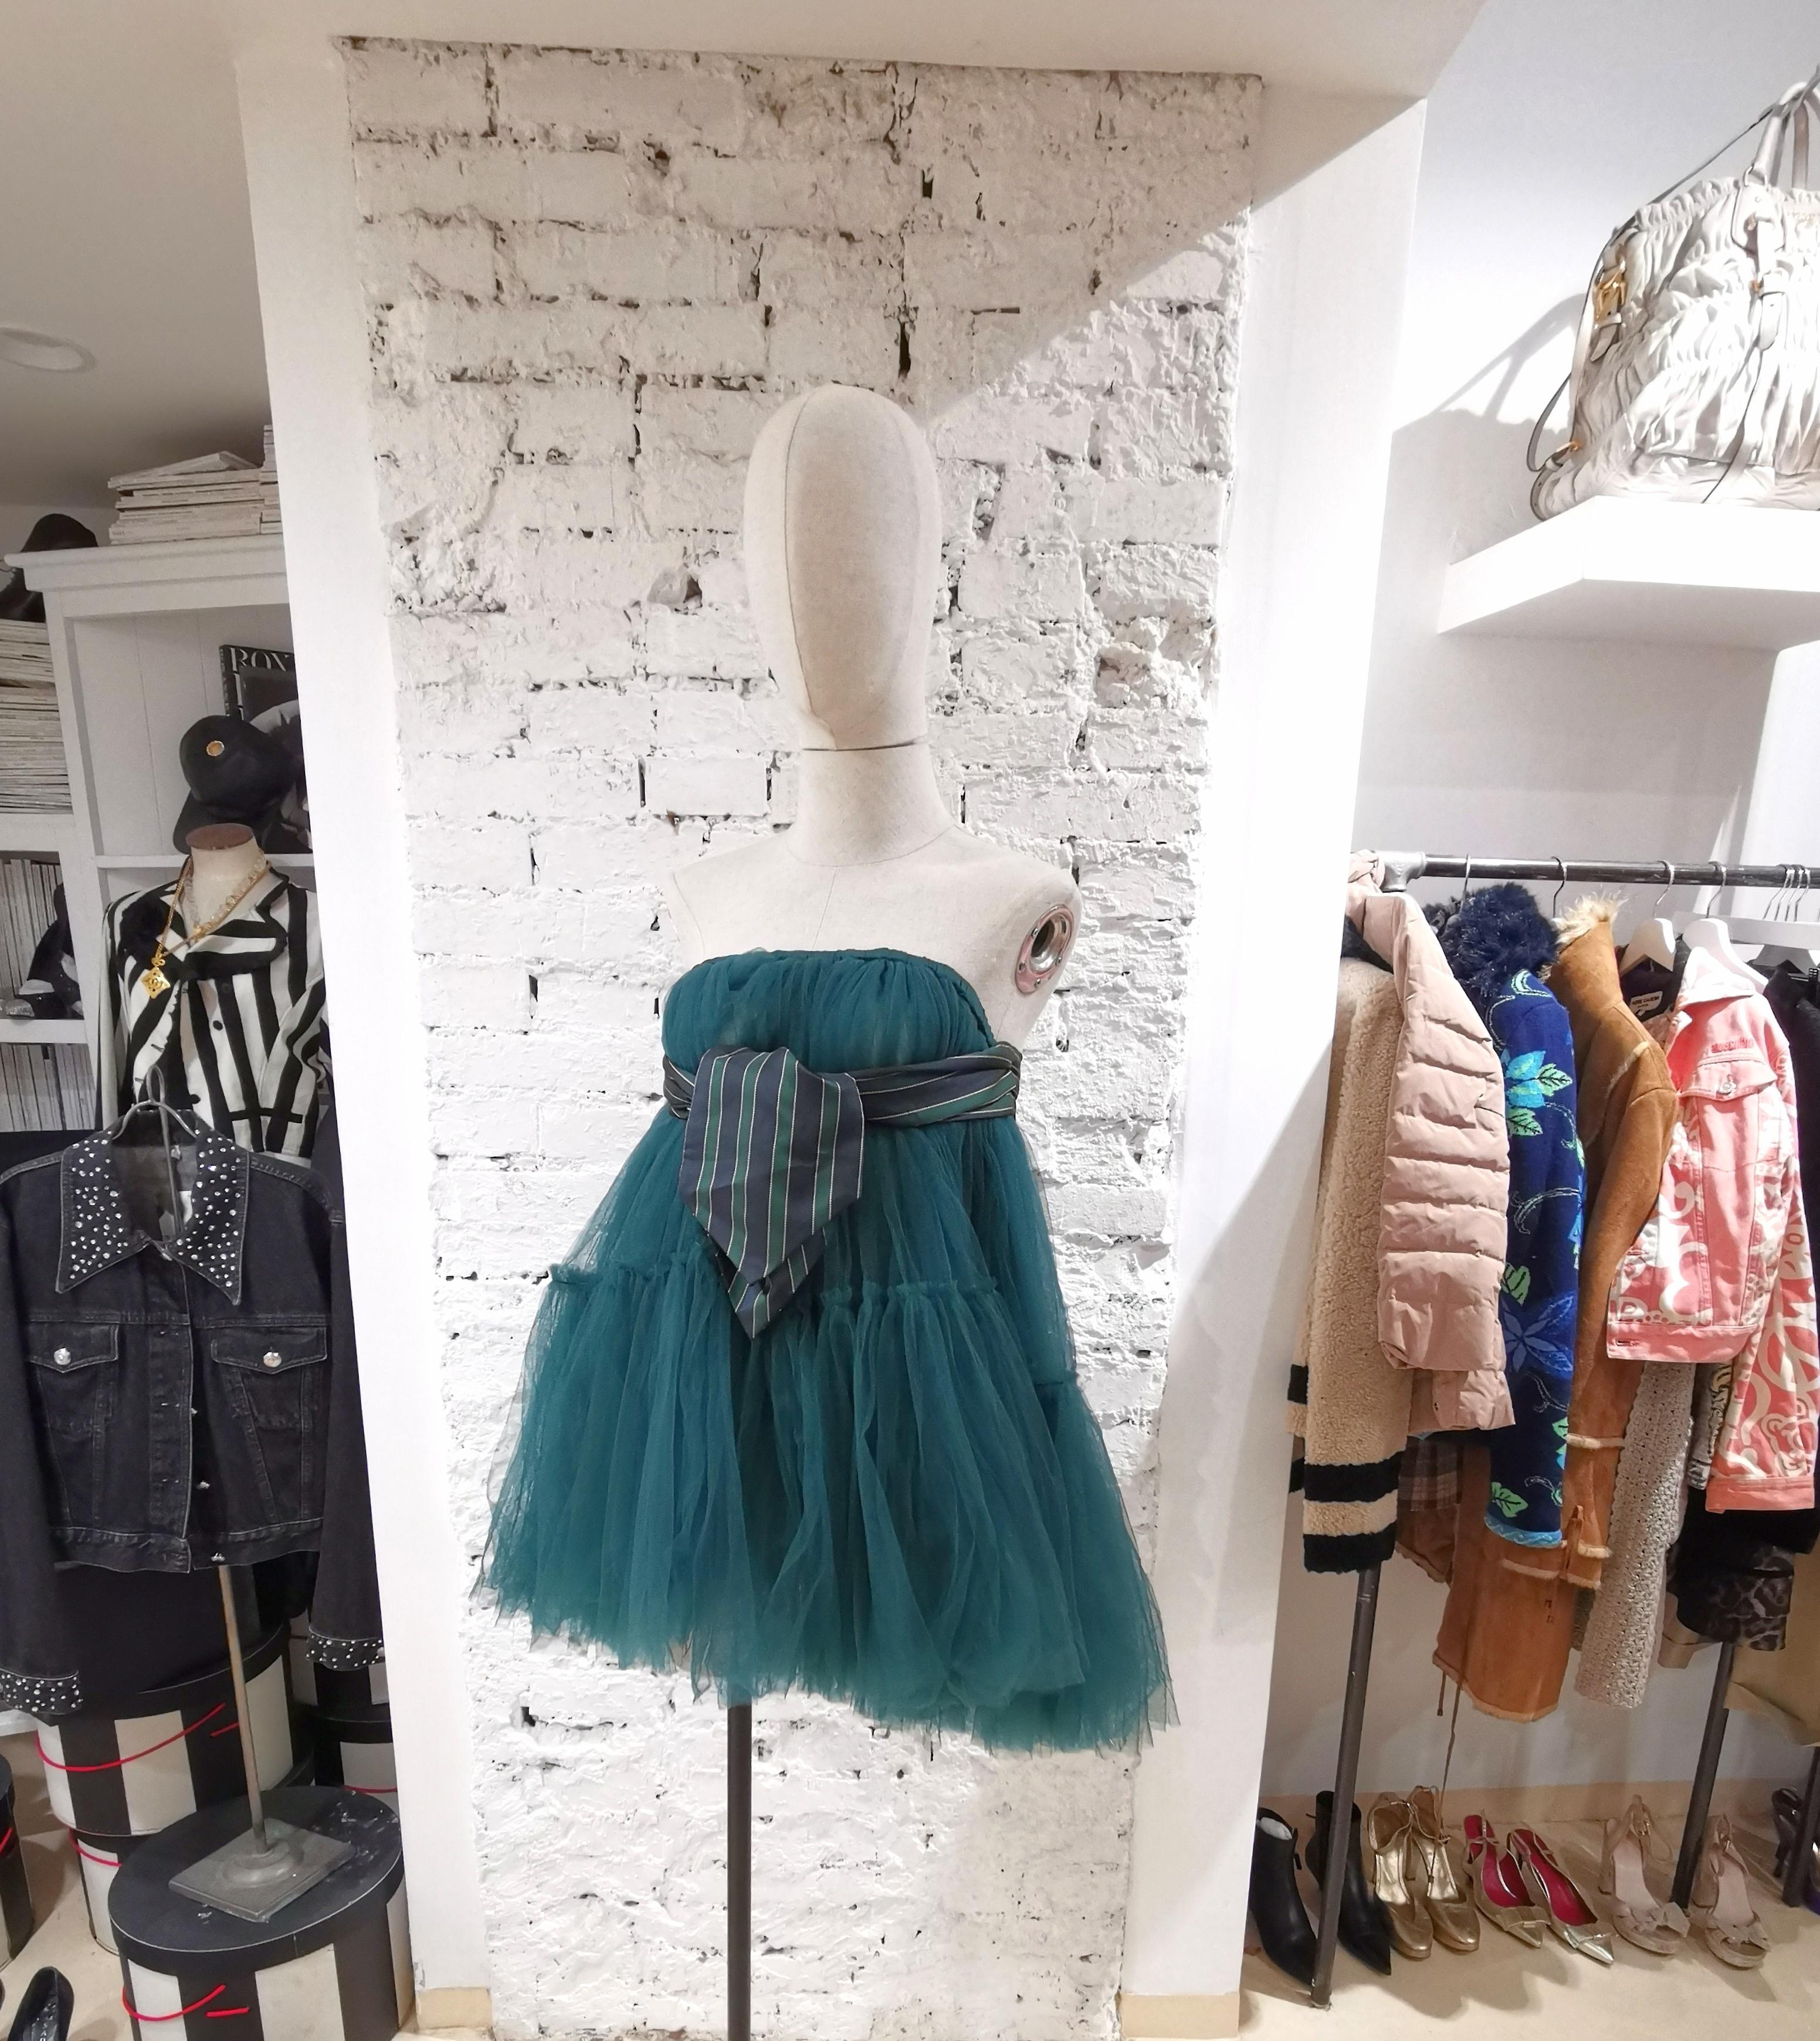 SOAB green tulle skirt / Dress
A green skirt totally handmade that can be used as a dress too

Size 42